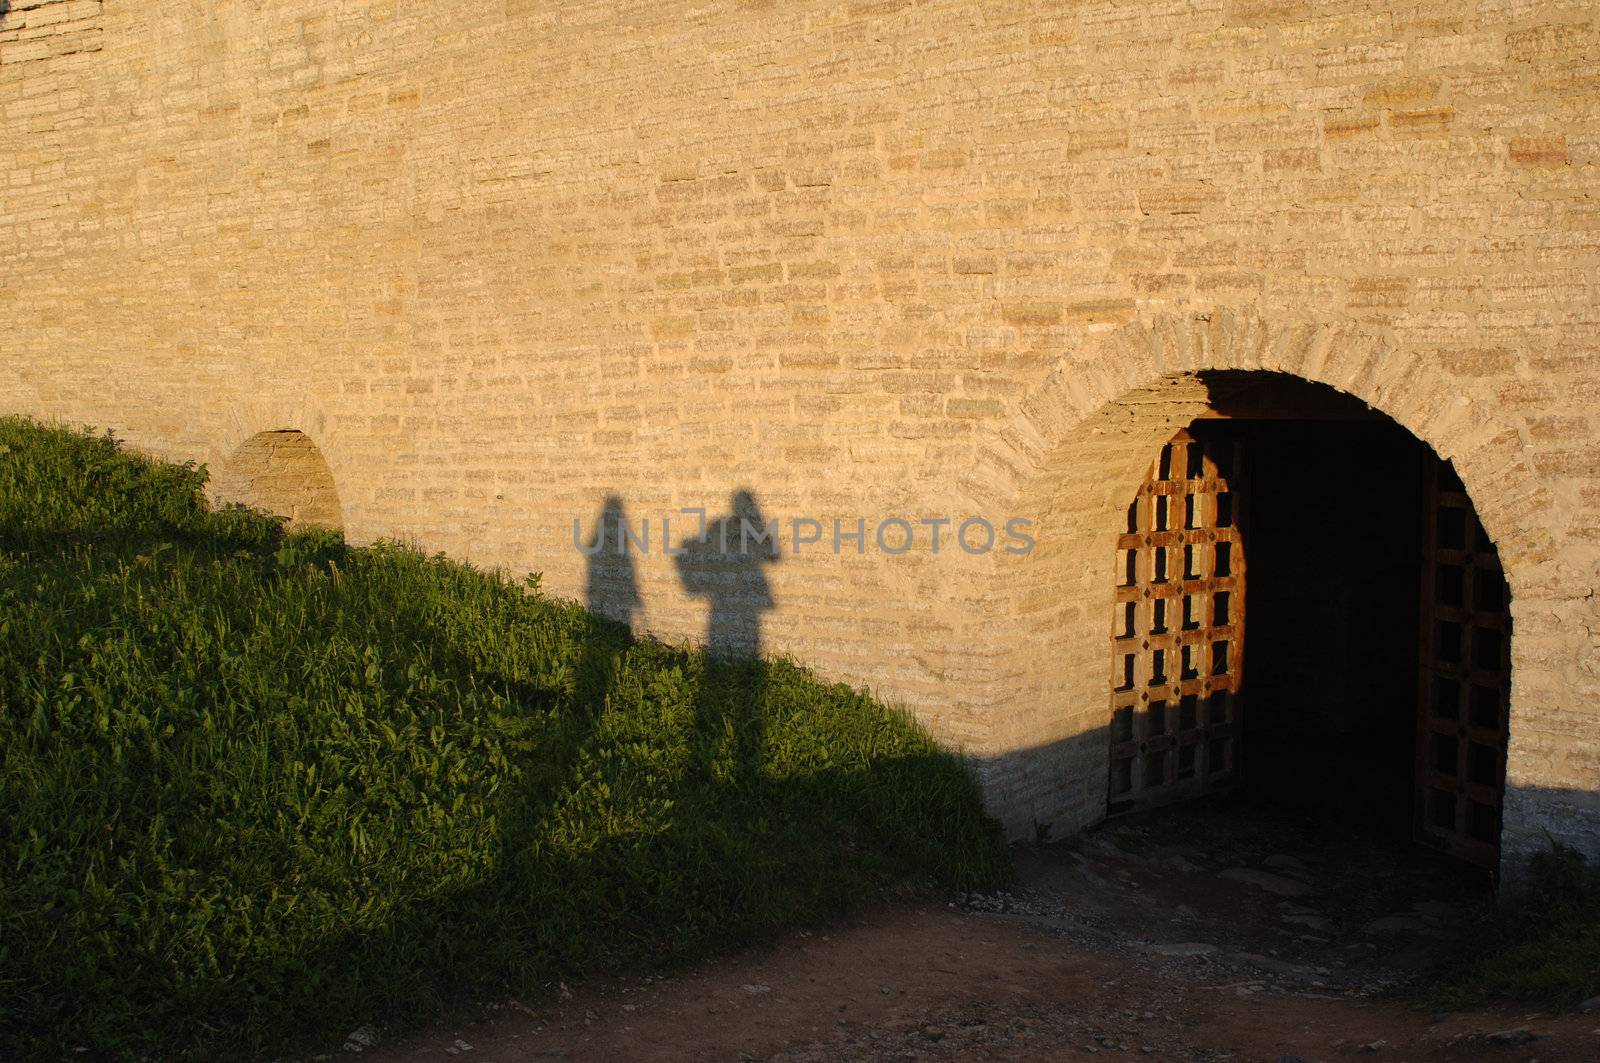 Shadows on the wall. by SURZ